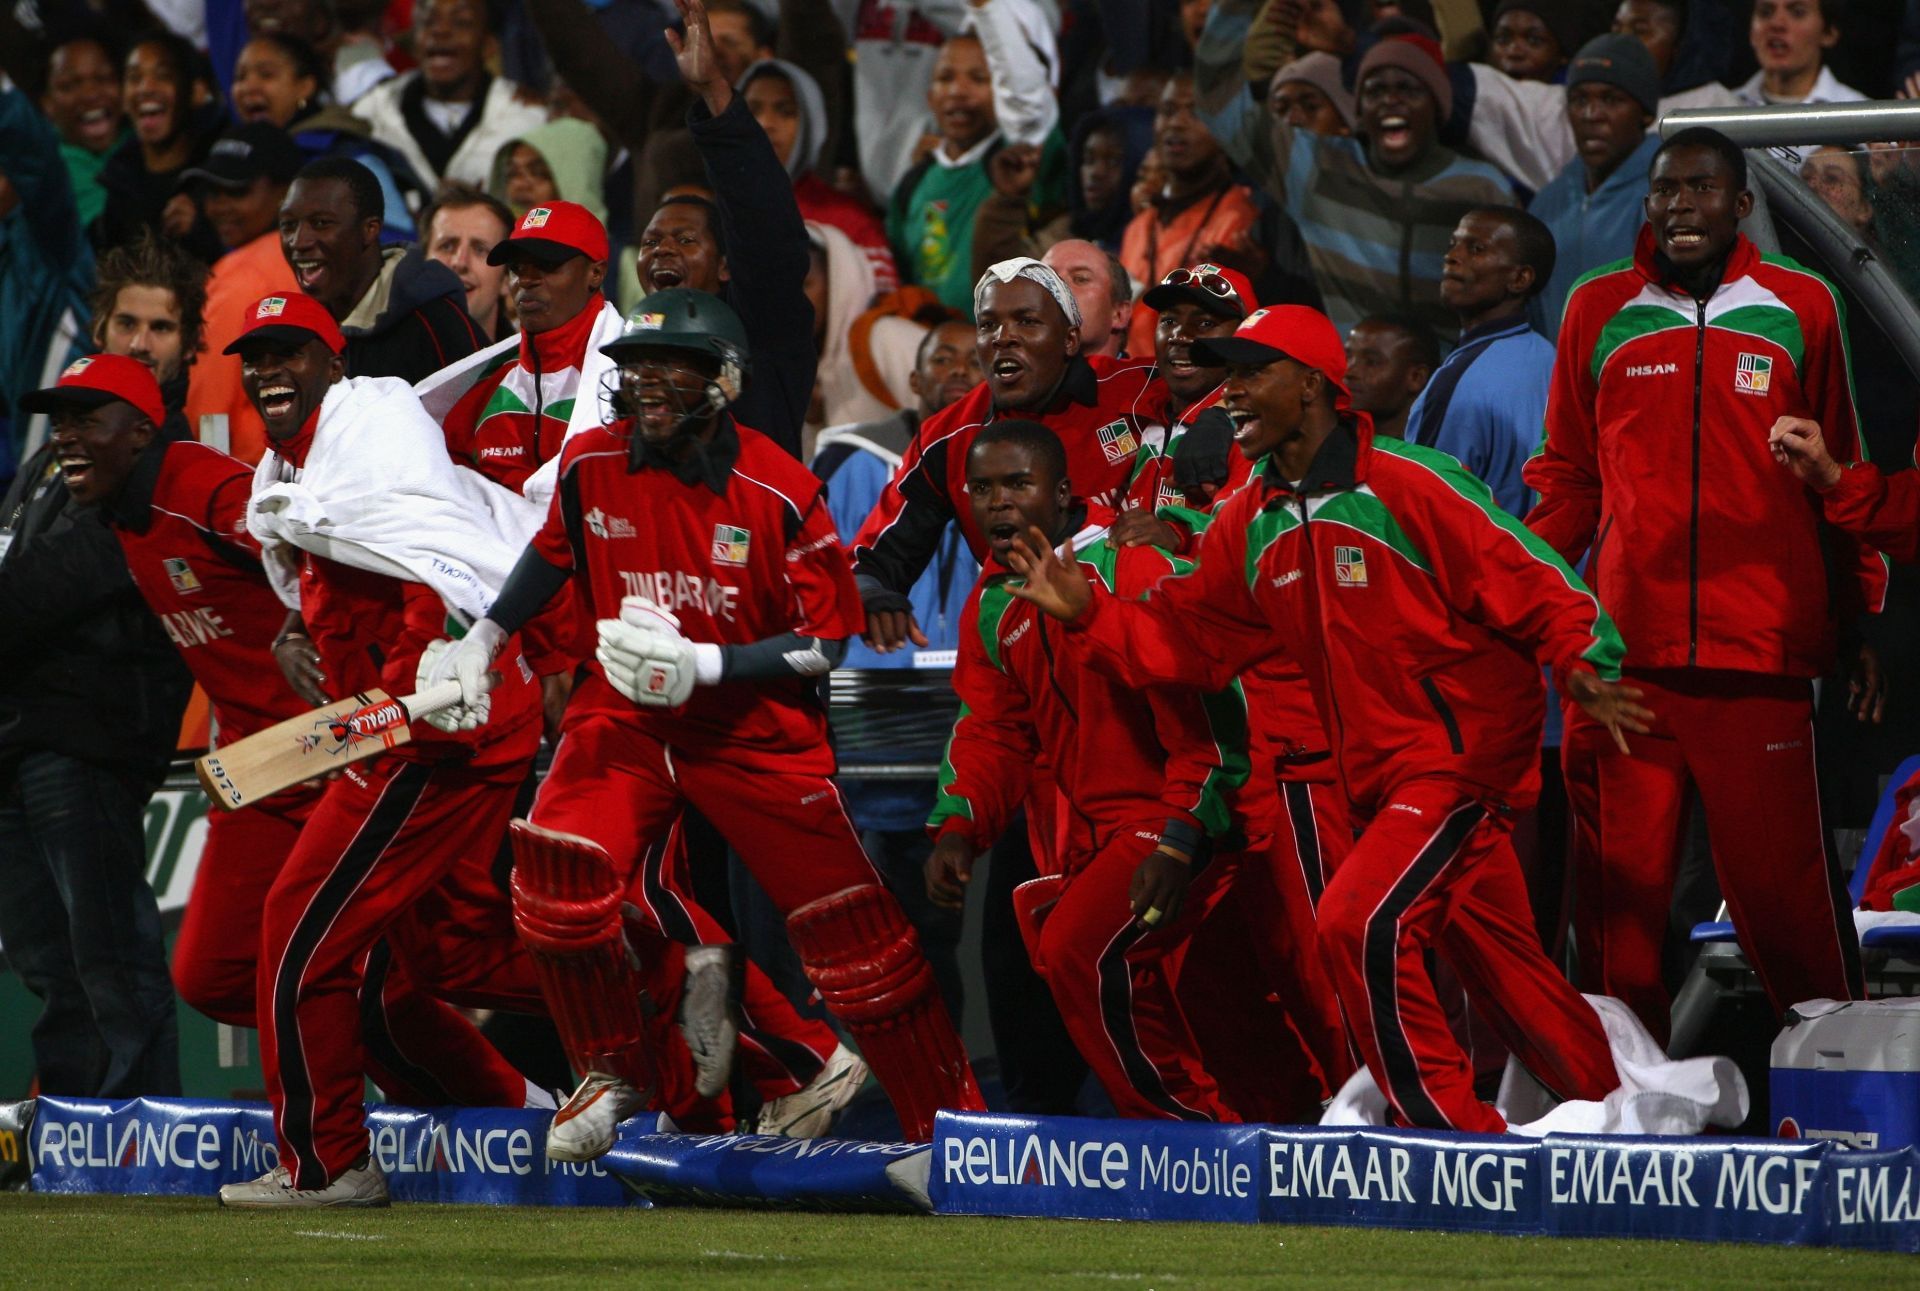 Zimbabwe won their first T20 World Cup match against Australia (Image: Getty)